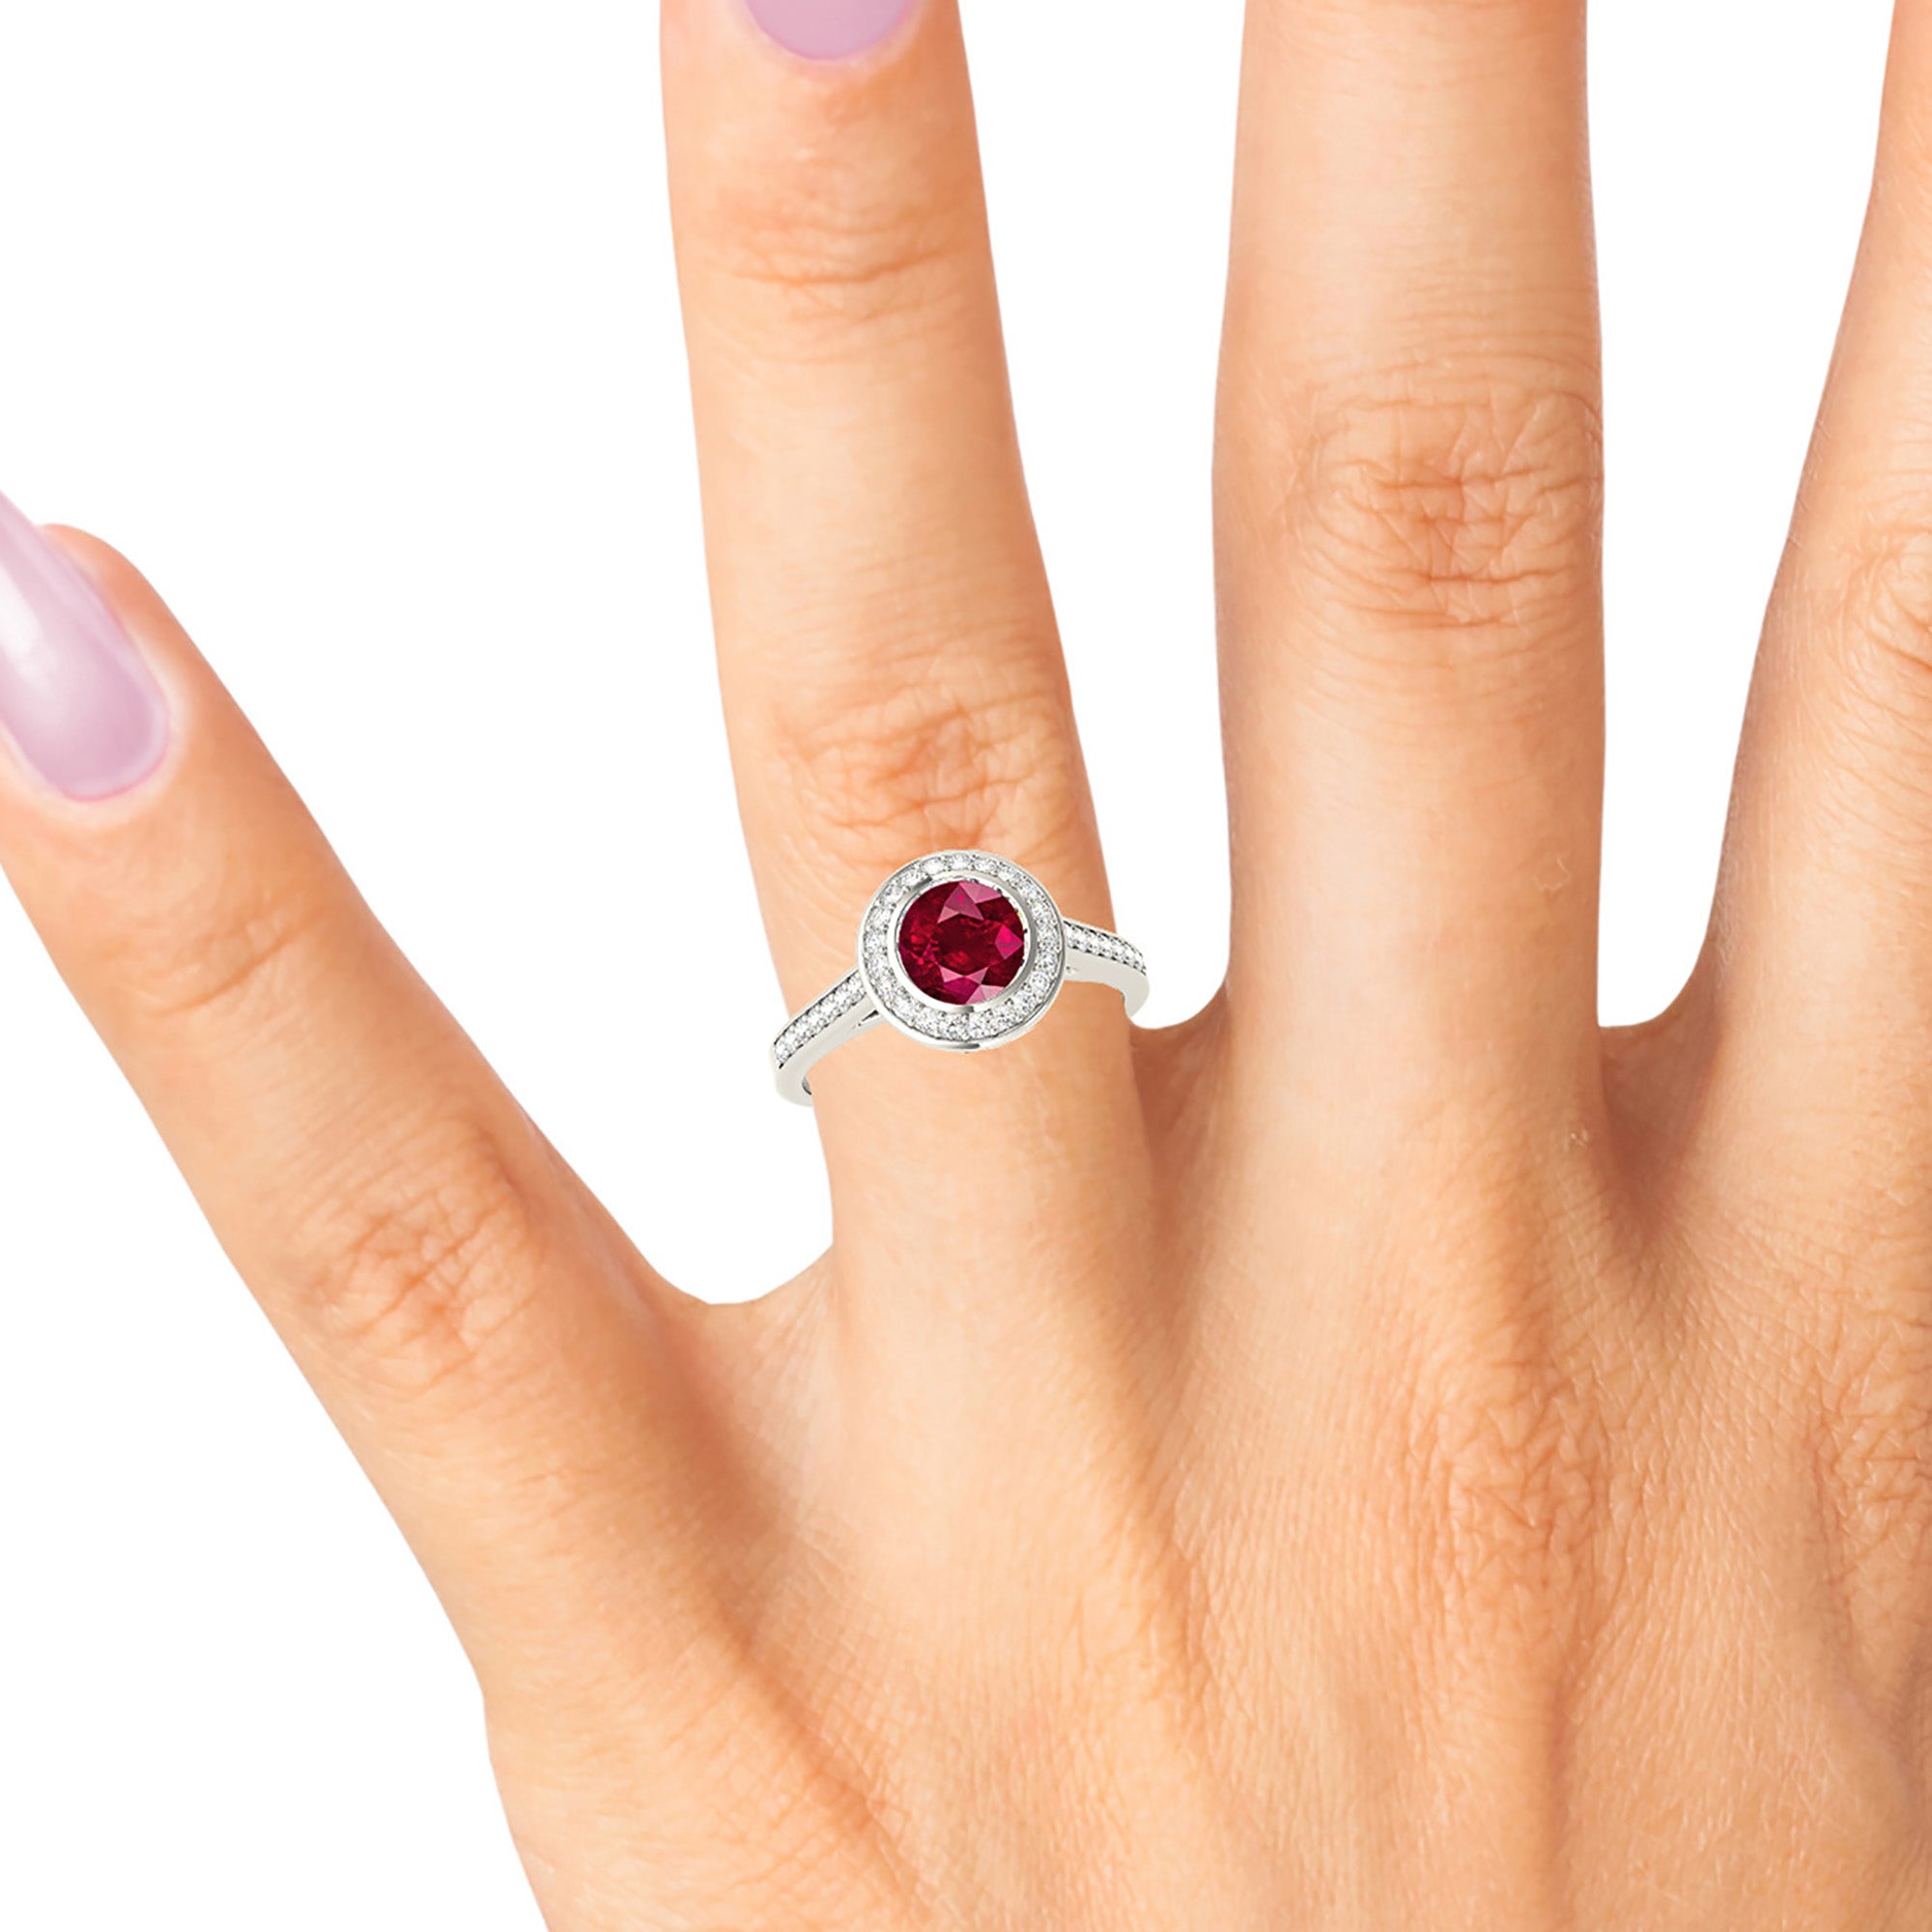 1.35 ct. Genuine Ruby Ring With 0.25 ctw. Diamond Halo, Delicate Diamond Band, Elegant Halo Ring | Round Ruby Halo Ring | Natural Ruby Ring-in 14K/18K White, Yellow, Rose Gold and Platinum - Christmas Jewelry Gift -VIRABYANI